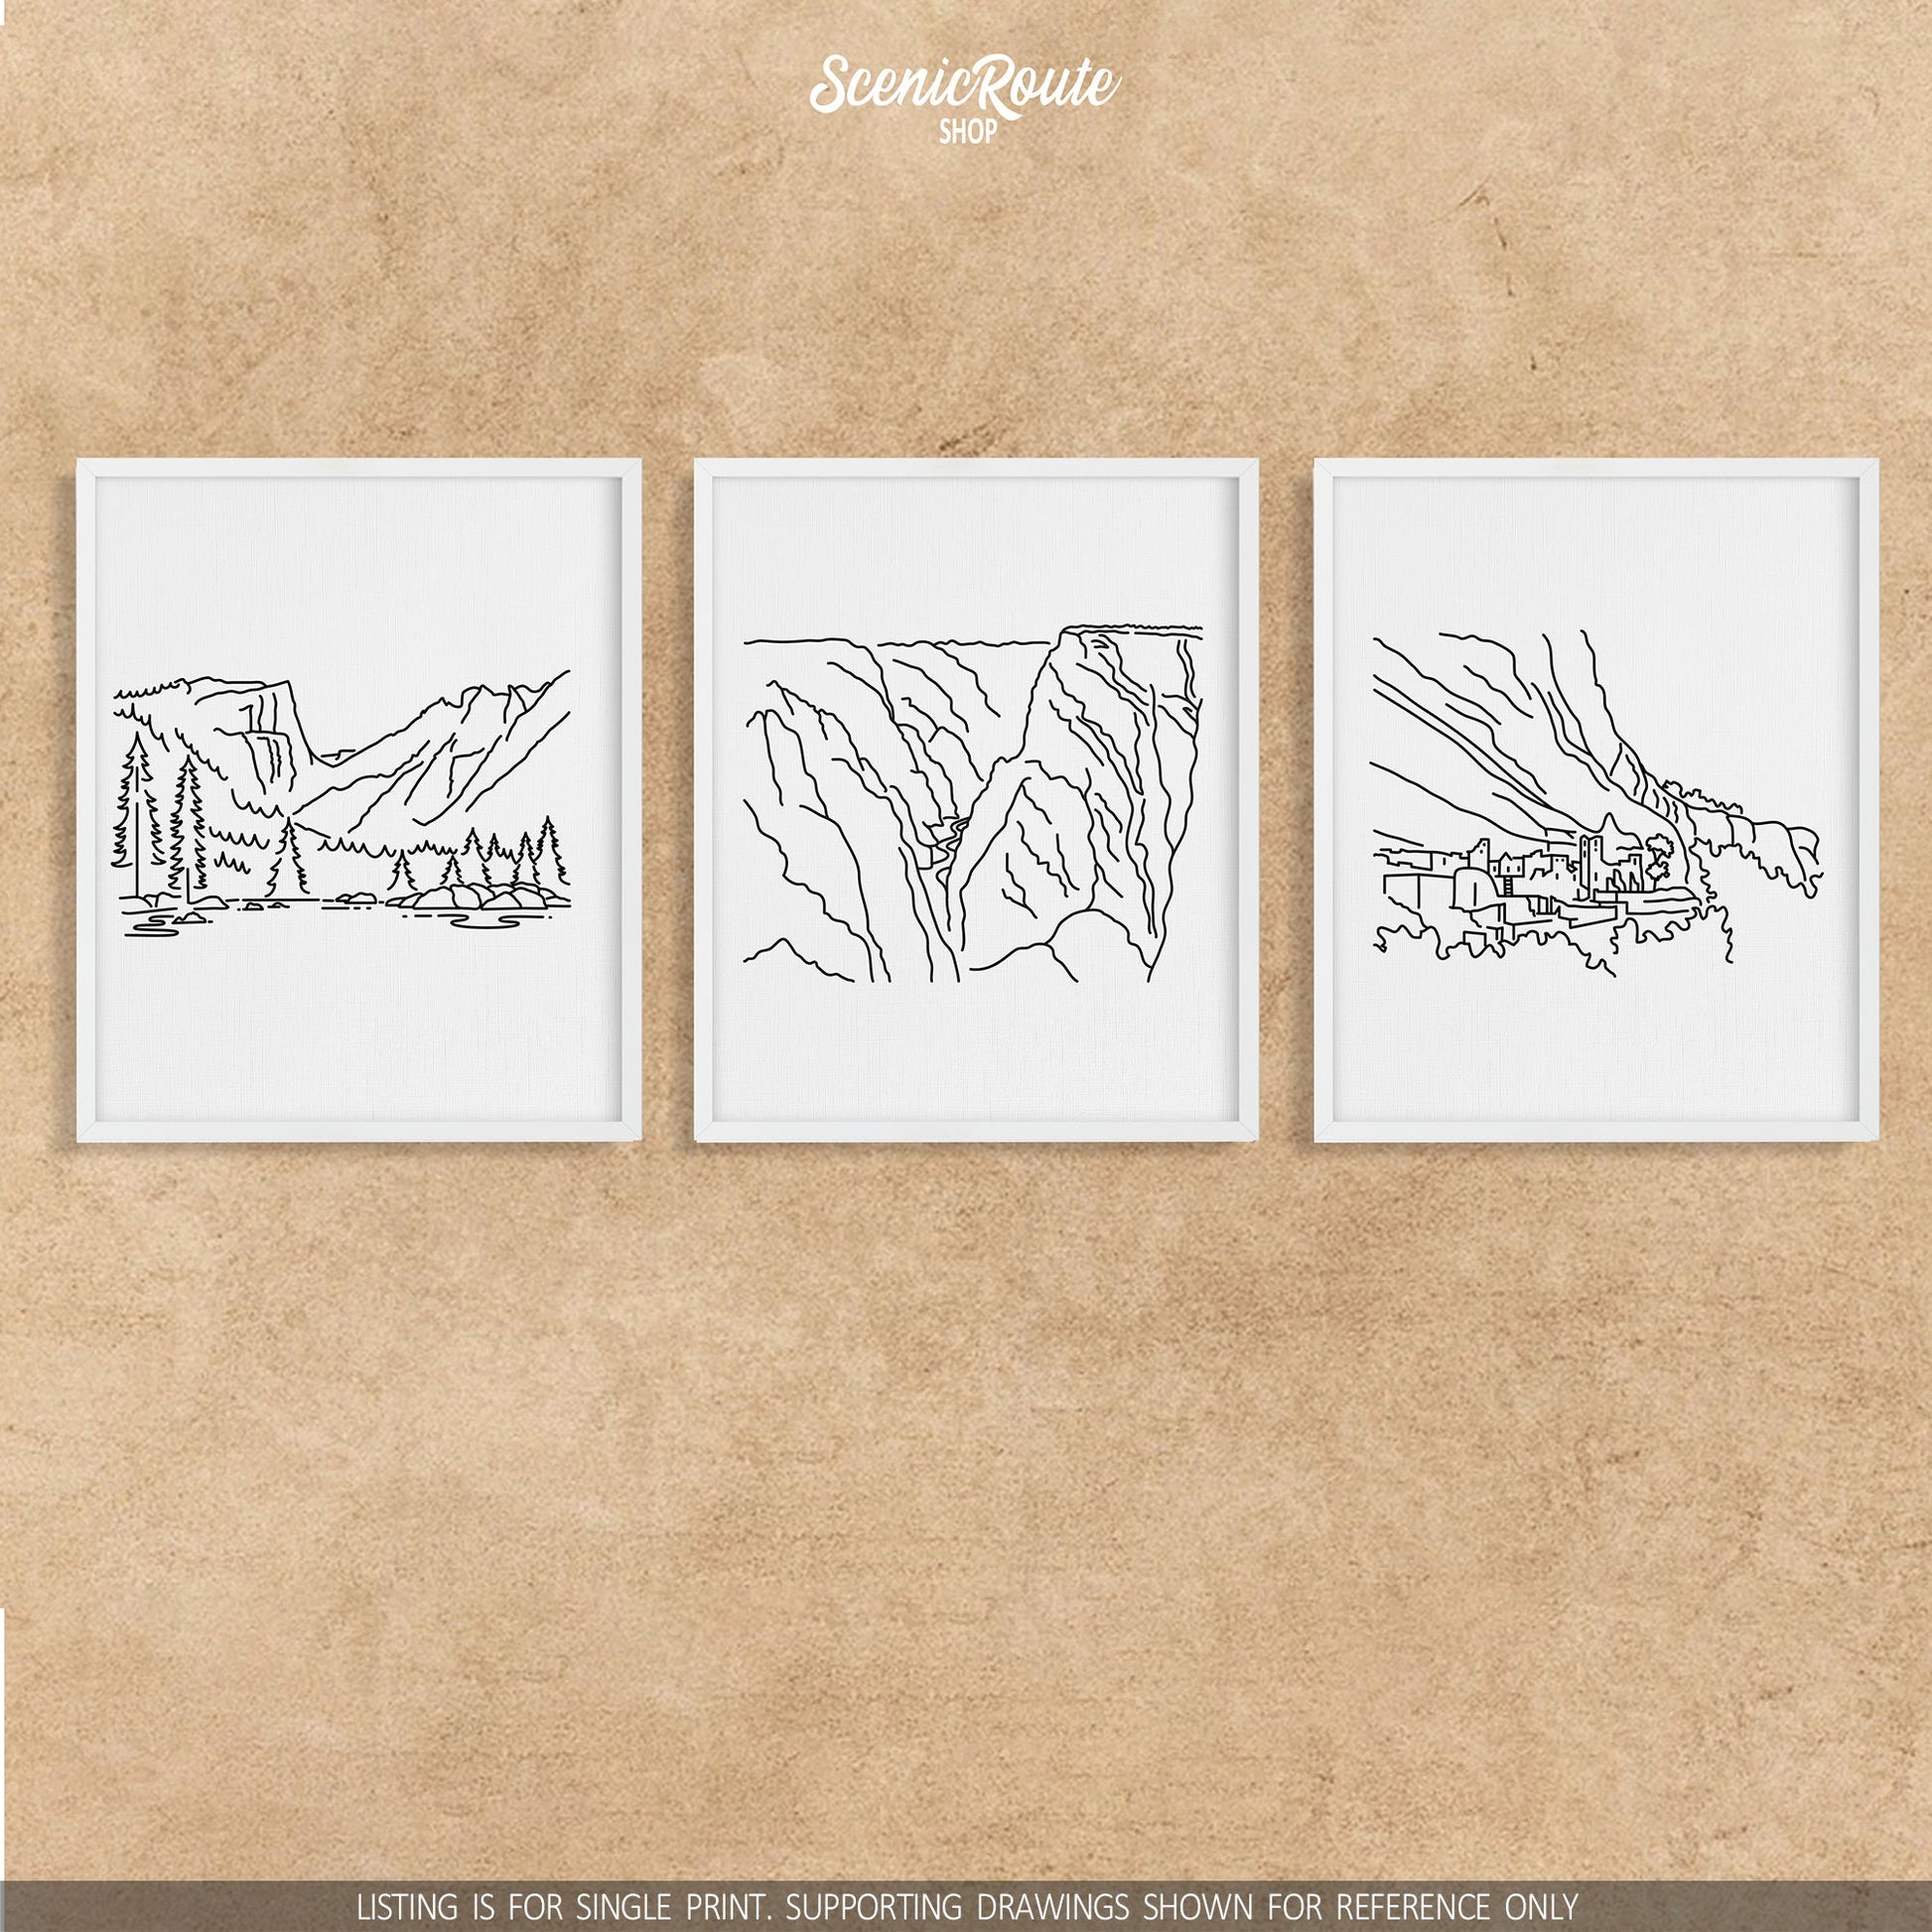 A group of three framed drawings on a wall. The line art drawings include Rocky Mountain National Park, Black Canyon of the Gunnison National Park, and Mesa Verde National Park